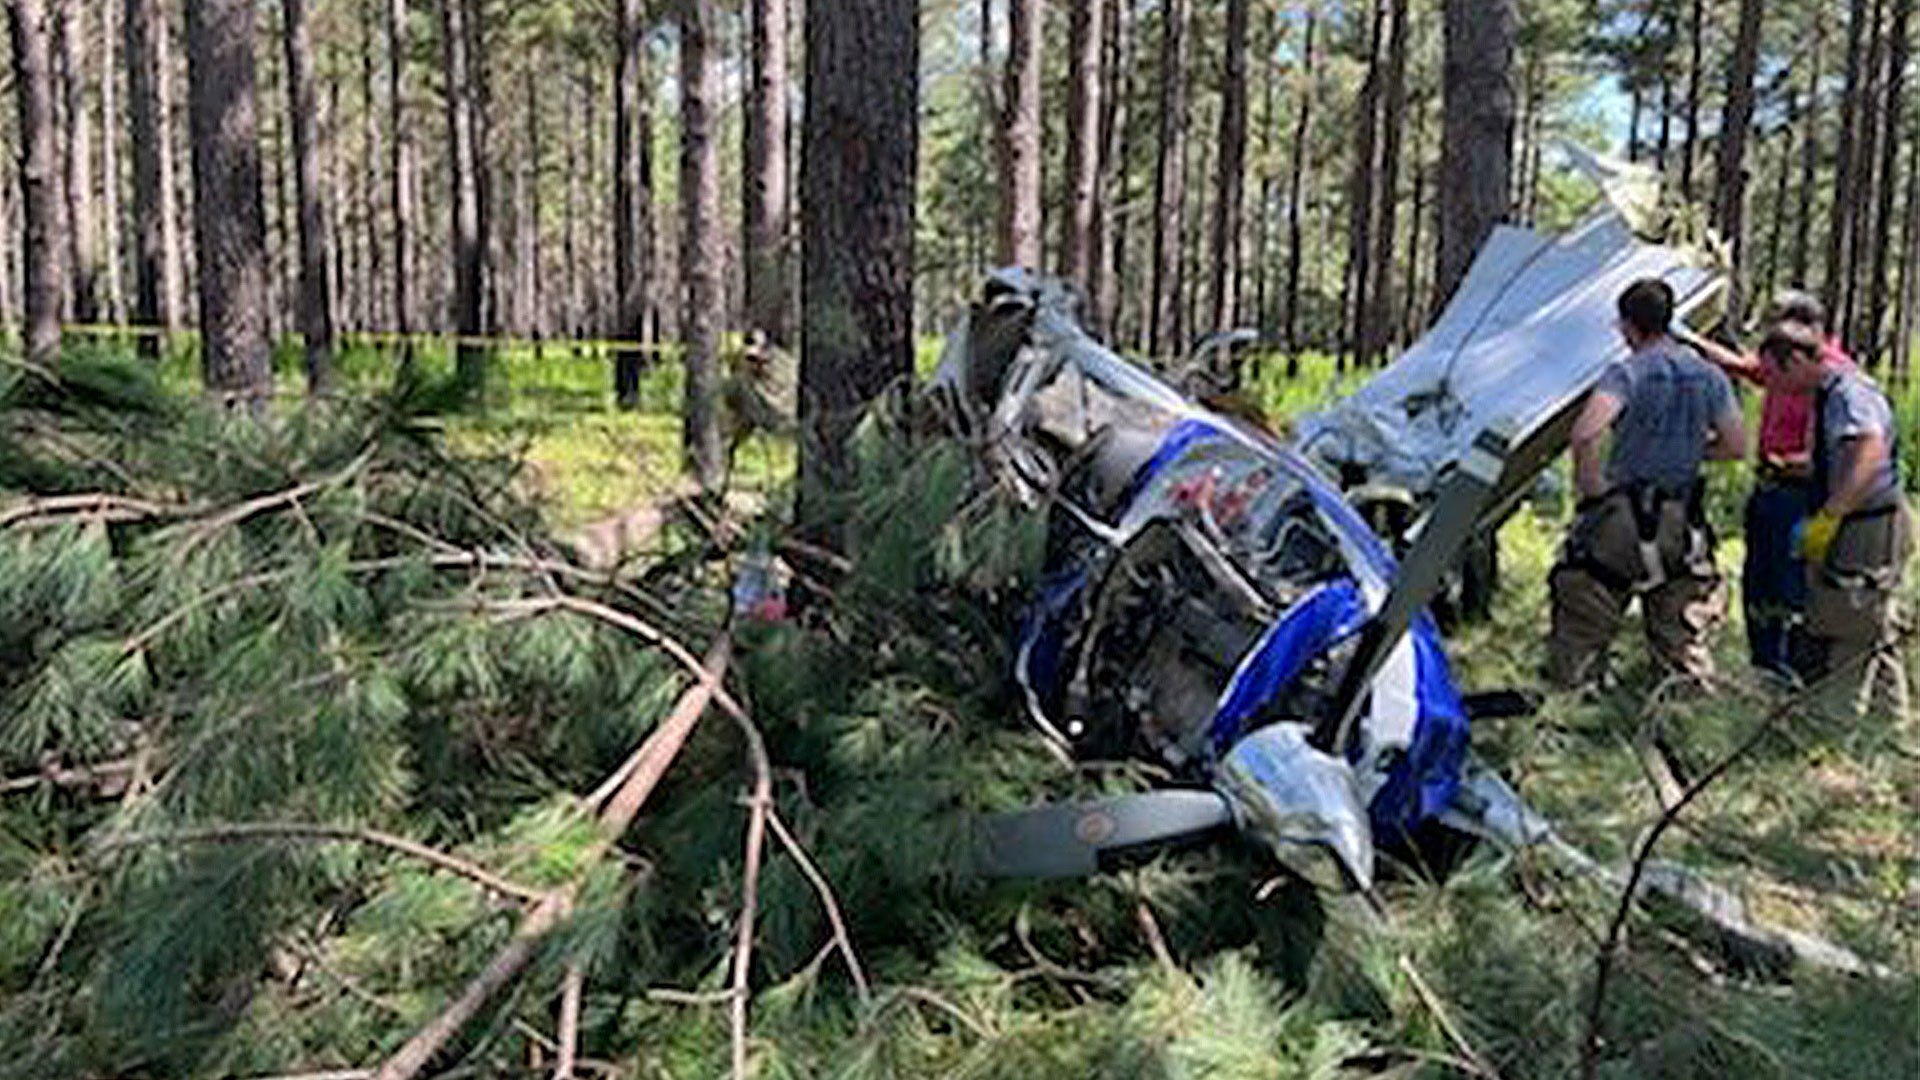 Members of the Jasper County Fire Rescue assess a plane crash four miles from Ridgeland-Claude Dean Airport in a wooded area. Jasper County Fire Rescue photo.